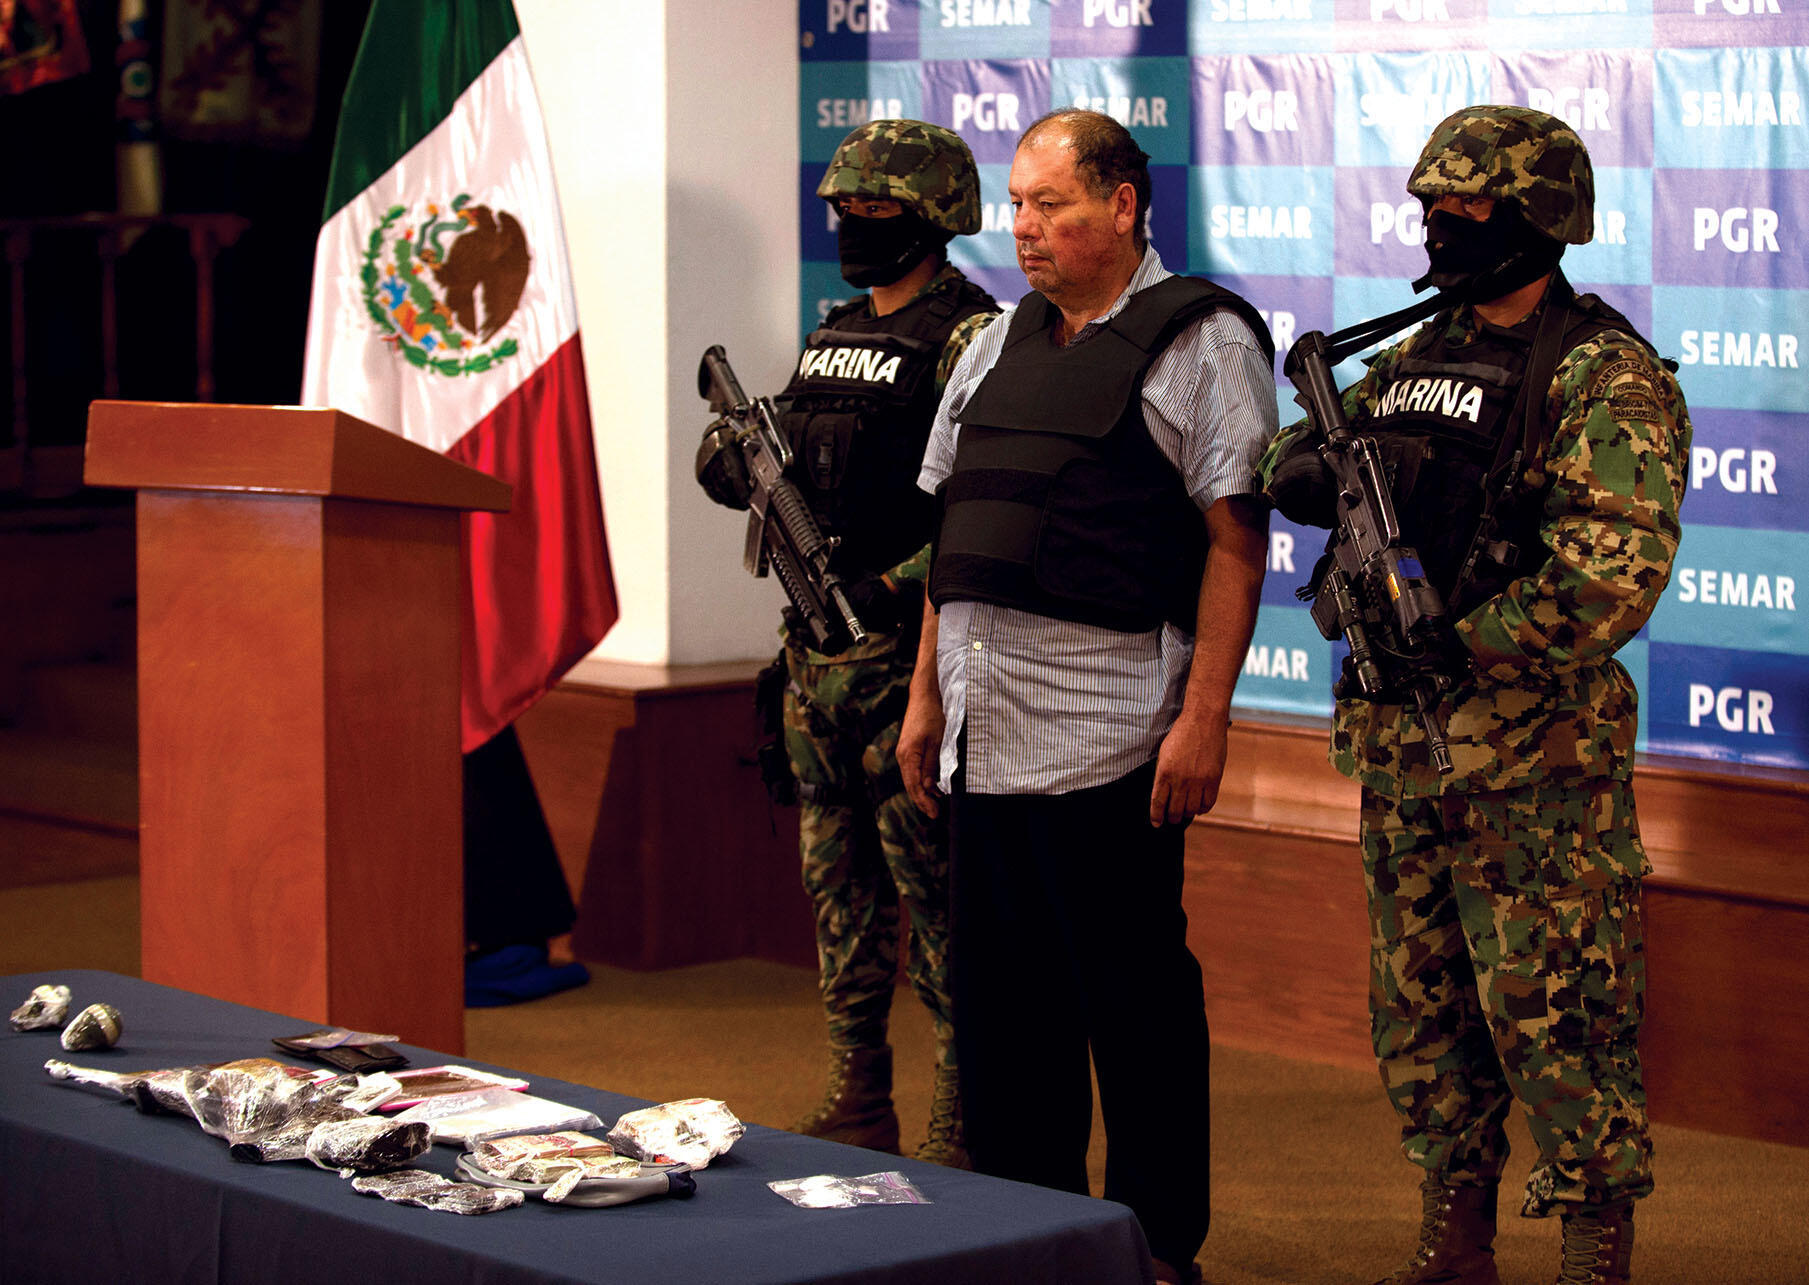 Mexican naval forces show off the captured Mario Cárdenas Guillén, alleged leader of the Gulf cartel, at a press conference in 2012. (Photo by Yuri Cortez/AFP/Getty Images.)